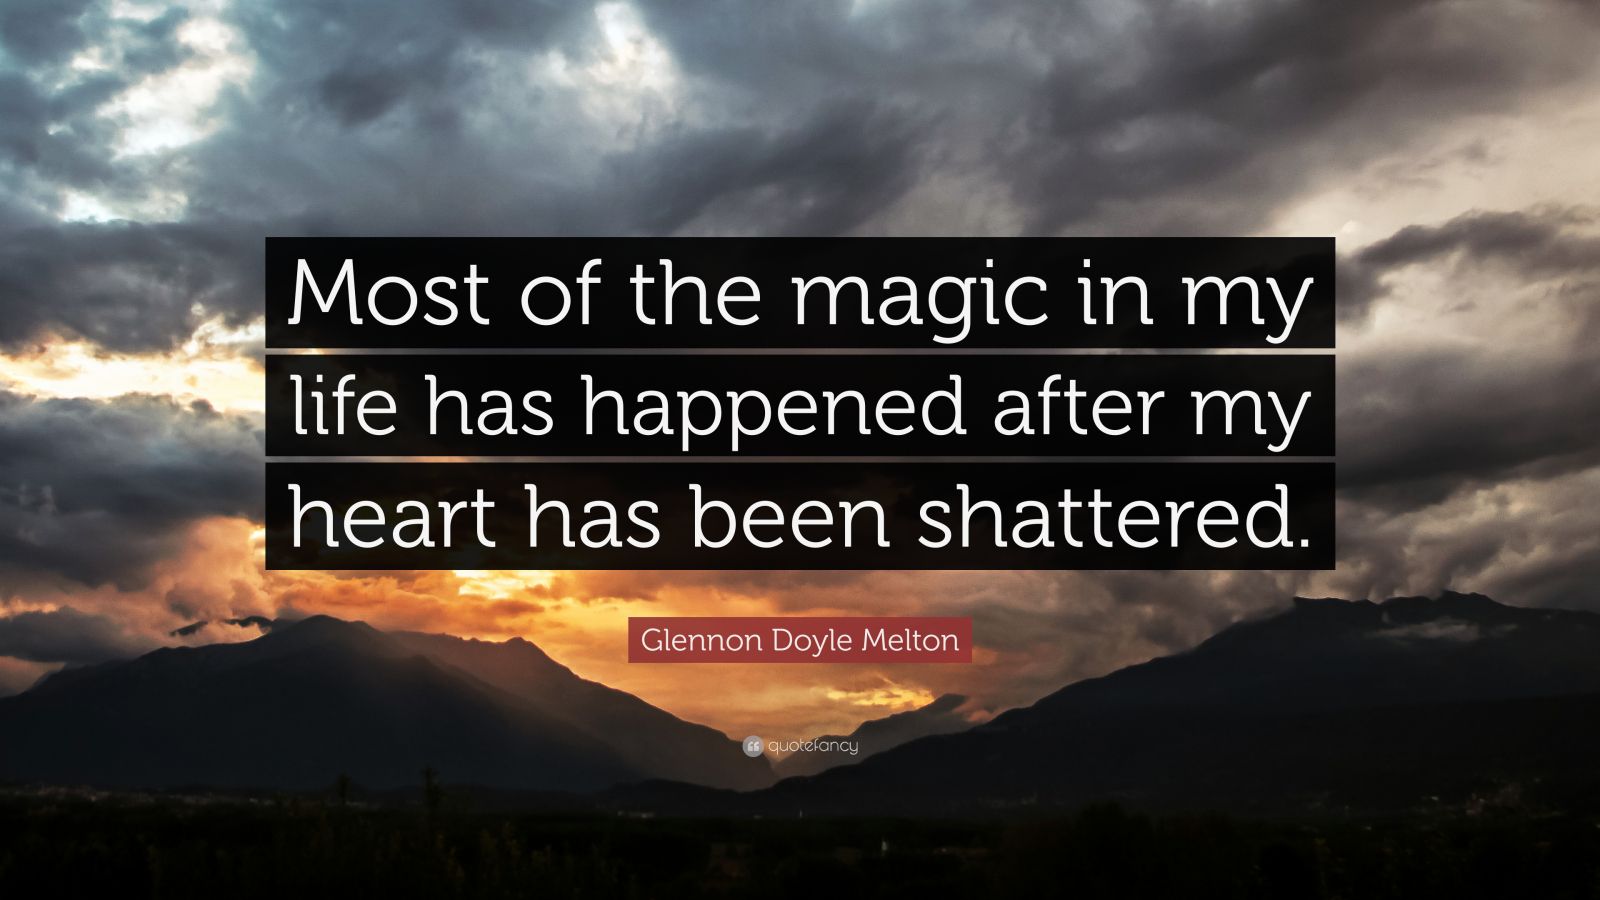 Glennon Doyle Melton Quote: “Most of the magic in my life has happened ...